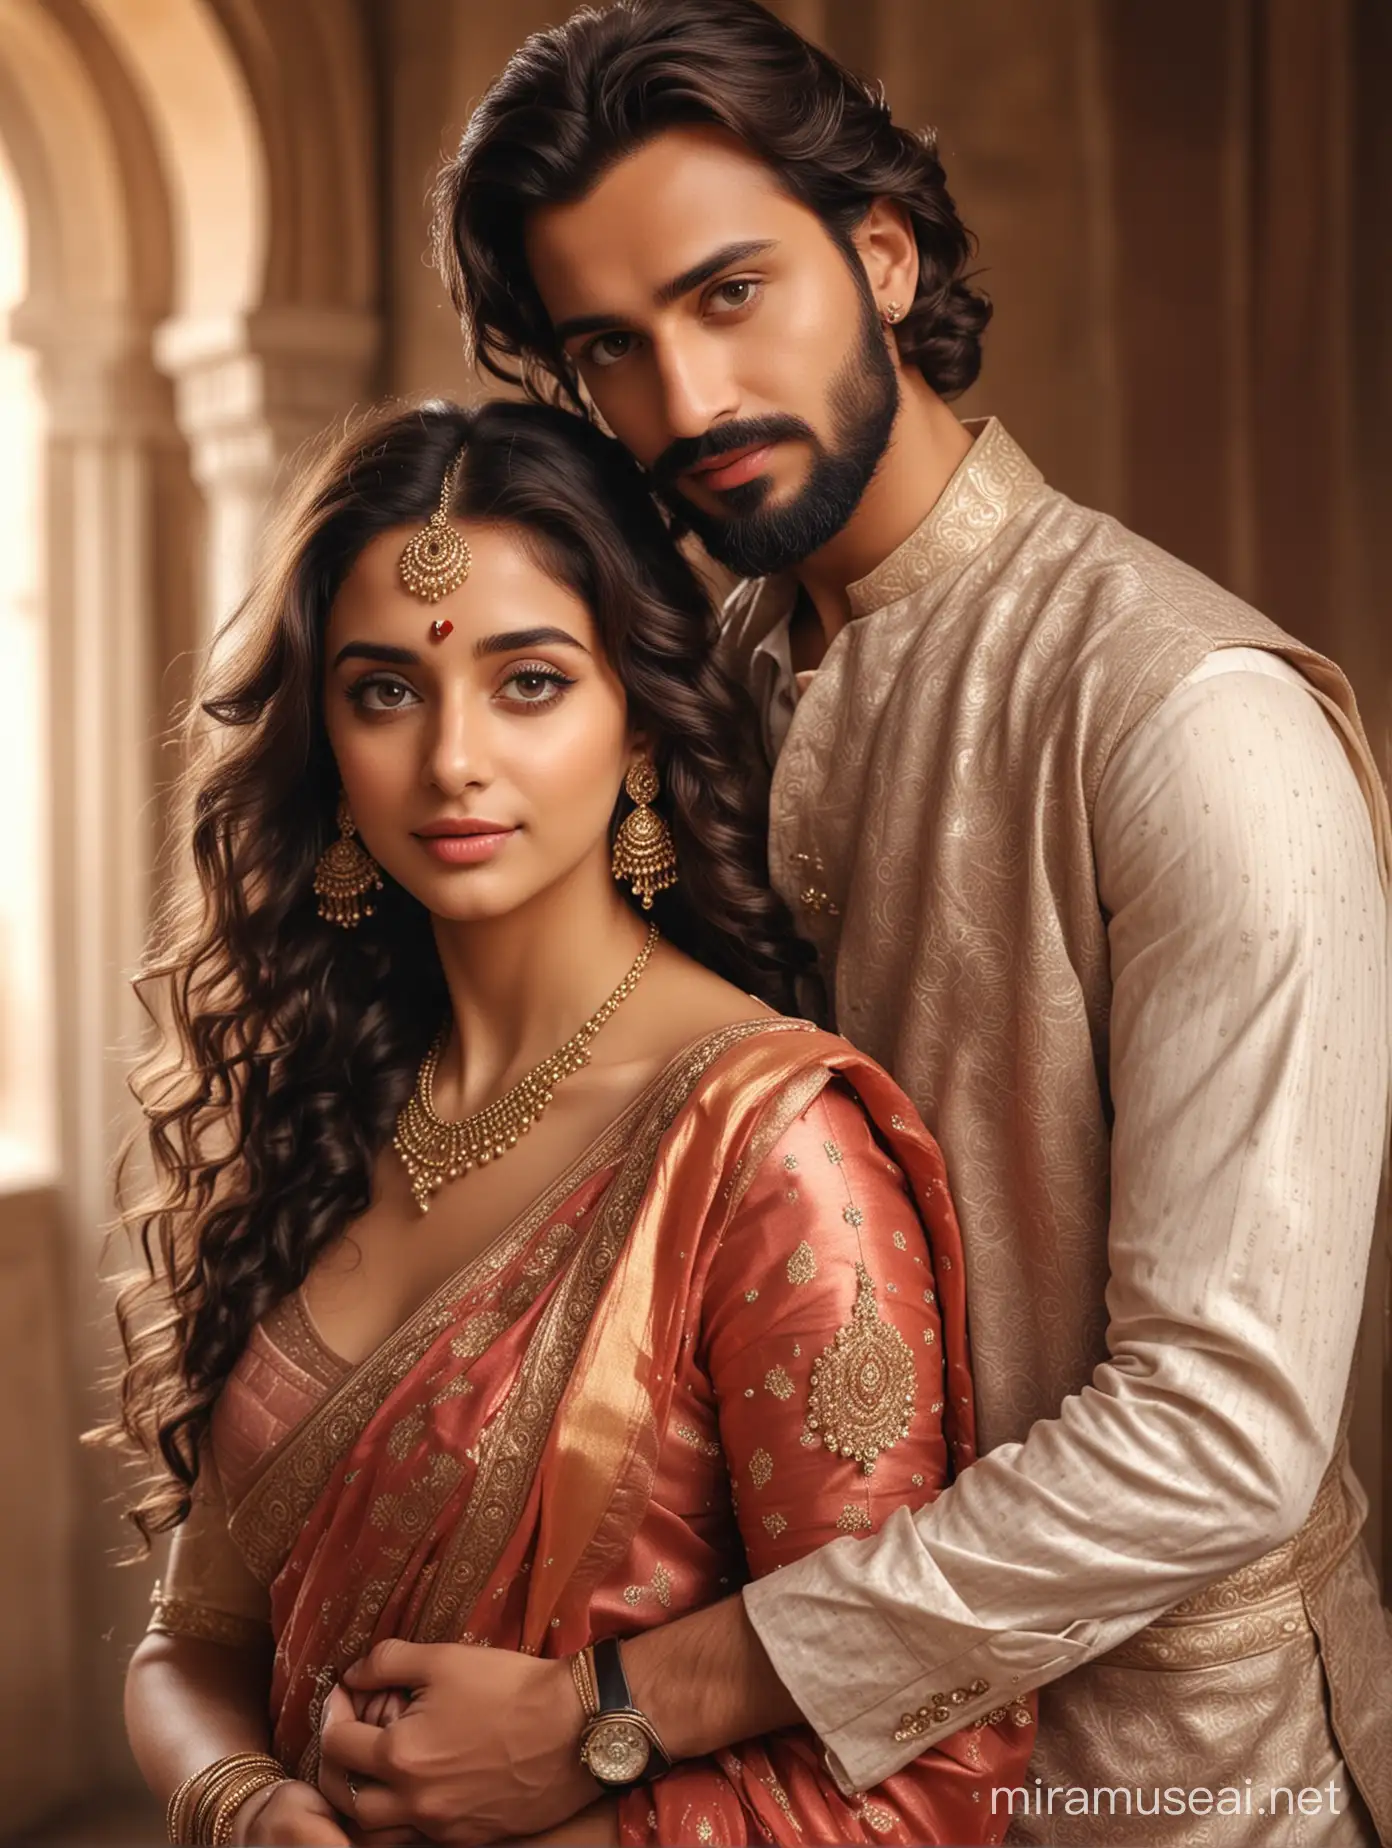 full portrait photo of most beautiful european couple as most beautiful indian couple, full body coverage,  most beautiful girl in elegant saree and long curly hairs, big wide eyes, full face, makeup, man with stylish beard,  boy perfect hair cut, formals, girl touching forehead on boy shoulder lowcut back, photo realistic, 4k.